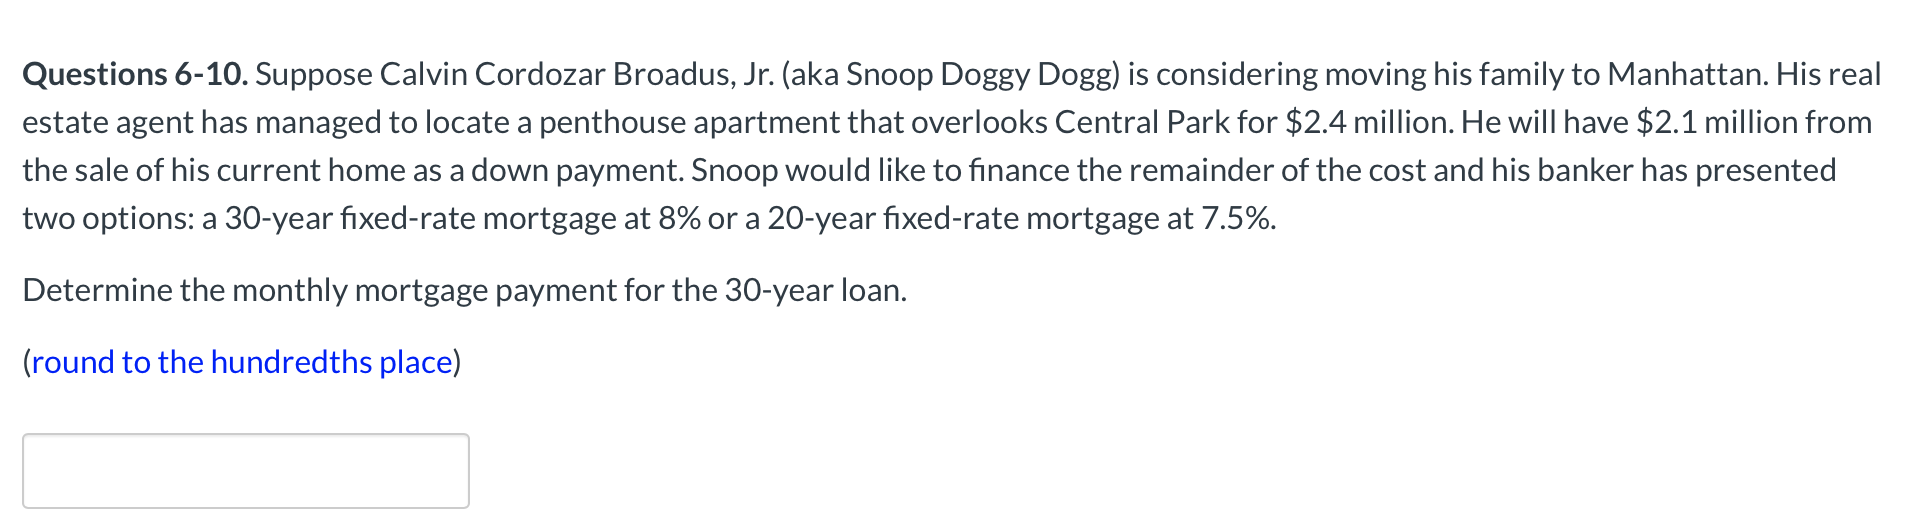 . Suppose Calvin Cordozar Broadus, Jr. (aka Snoop Doggy Dogg) is considering moving his family to Manhattan. His real
s managed to locate a penthouse apartment that overlooks Central Park for $2.4 million. He will have $2.1 million from
urrent home as a down payment. Snoop would like to finance the remainder of the cost and his banker has presented
O-year fixed-rate mortgage at 8% or a 20-year fixed-rate mortgage at 7.5%.
monthly mortgage payment for the 30-year loan.
indredths place)
